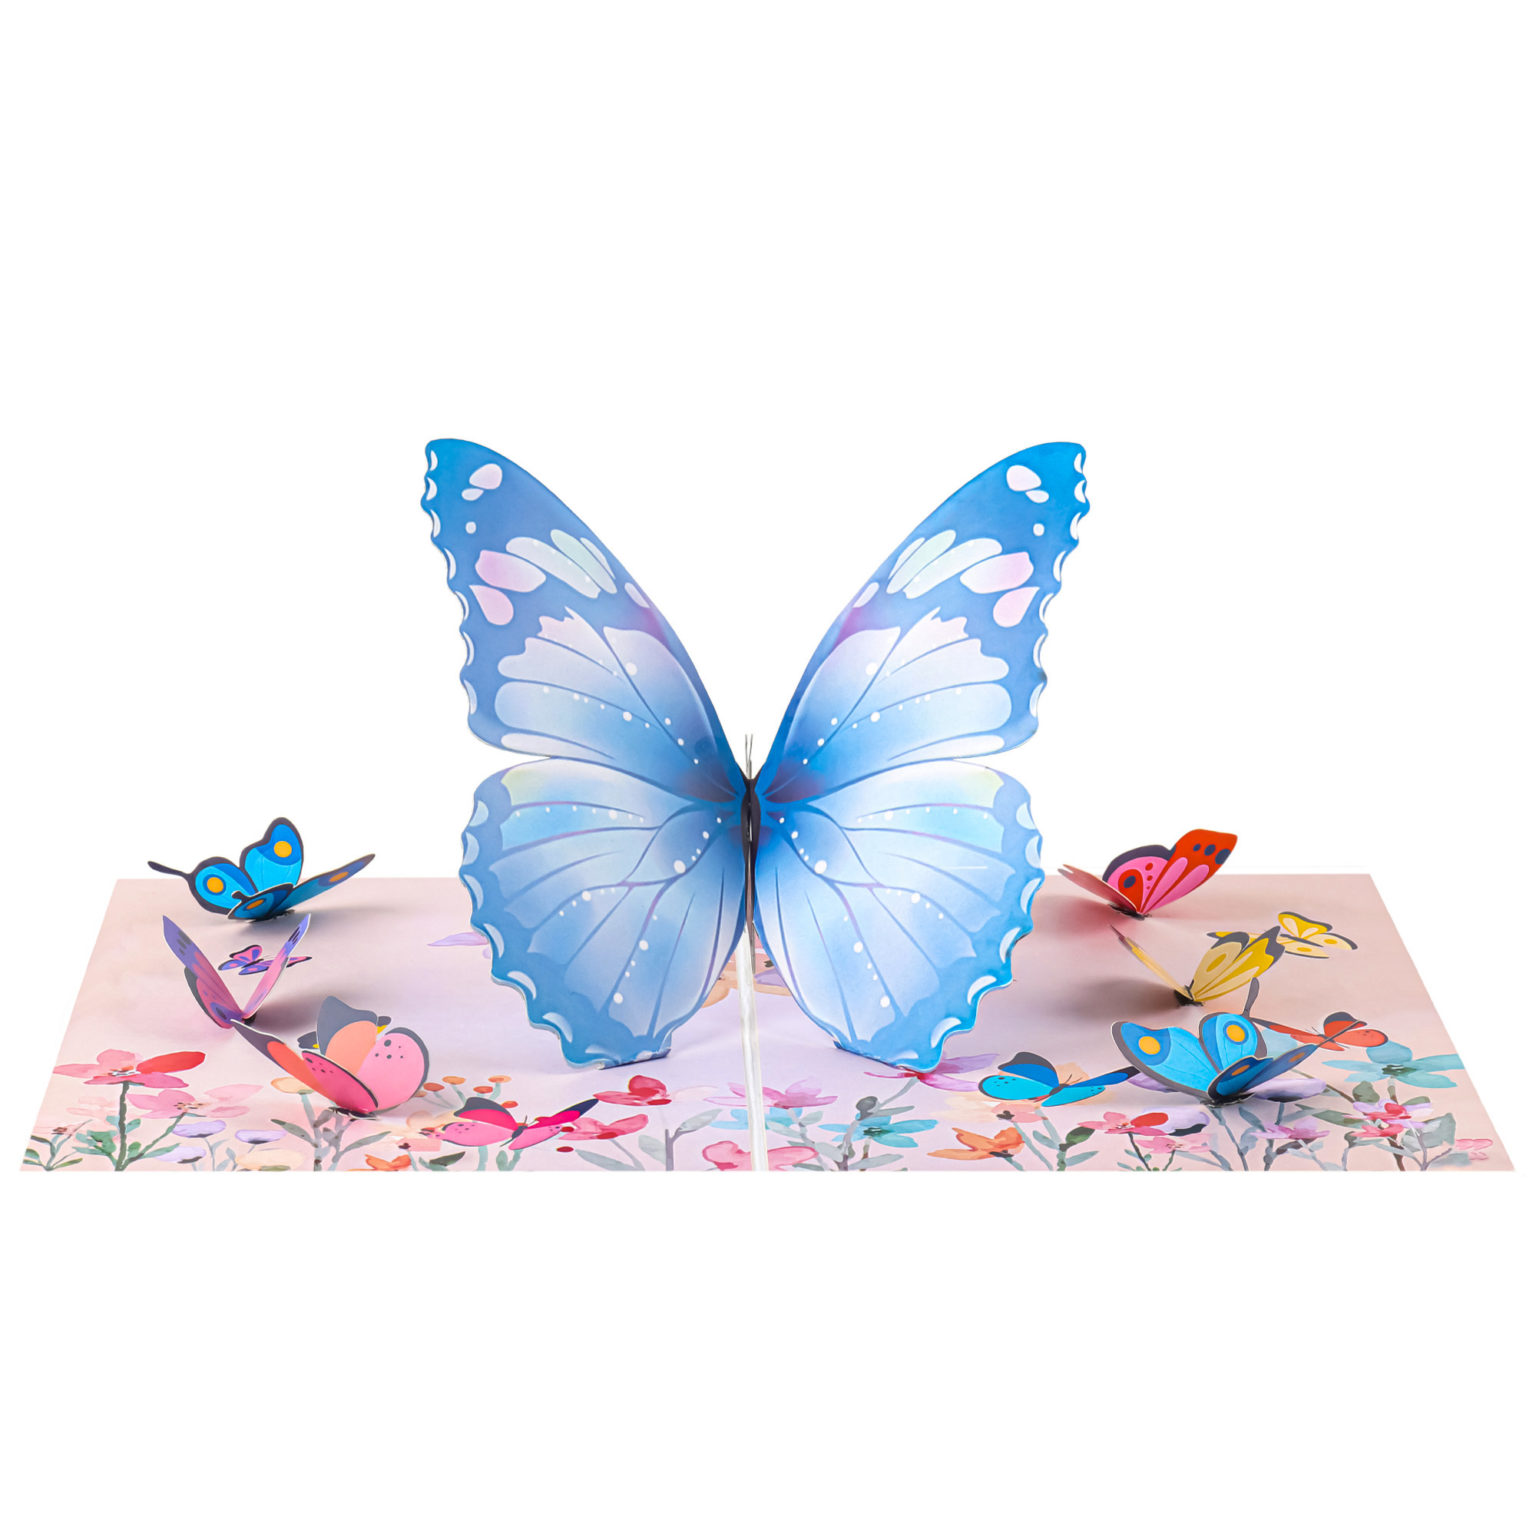 Butterflies-Wild-Flower-Pop-Up-Card-overview-wholesale-manufacture-custom-design-custom-mothers-day-card-pop-up-easter-cards